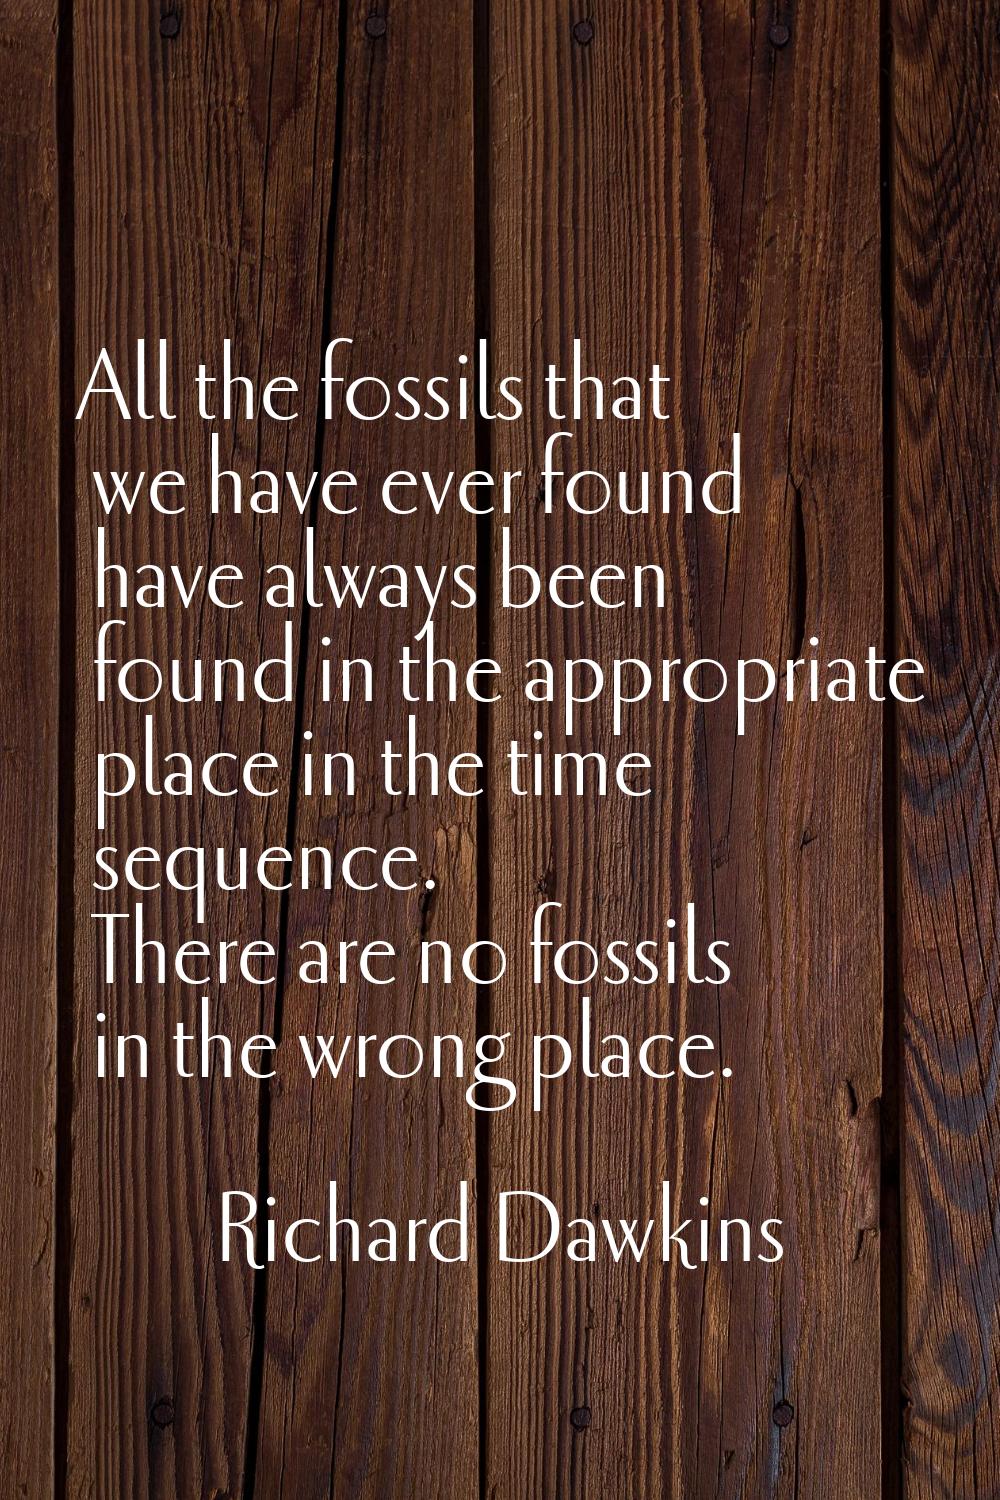 All the fossils that we have ever found have always been found in the appropriate place in the time